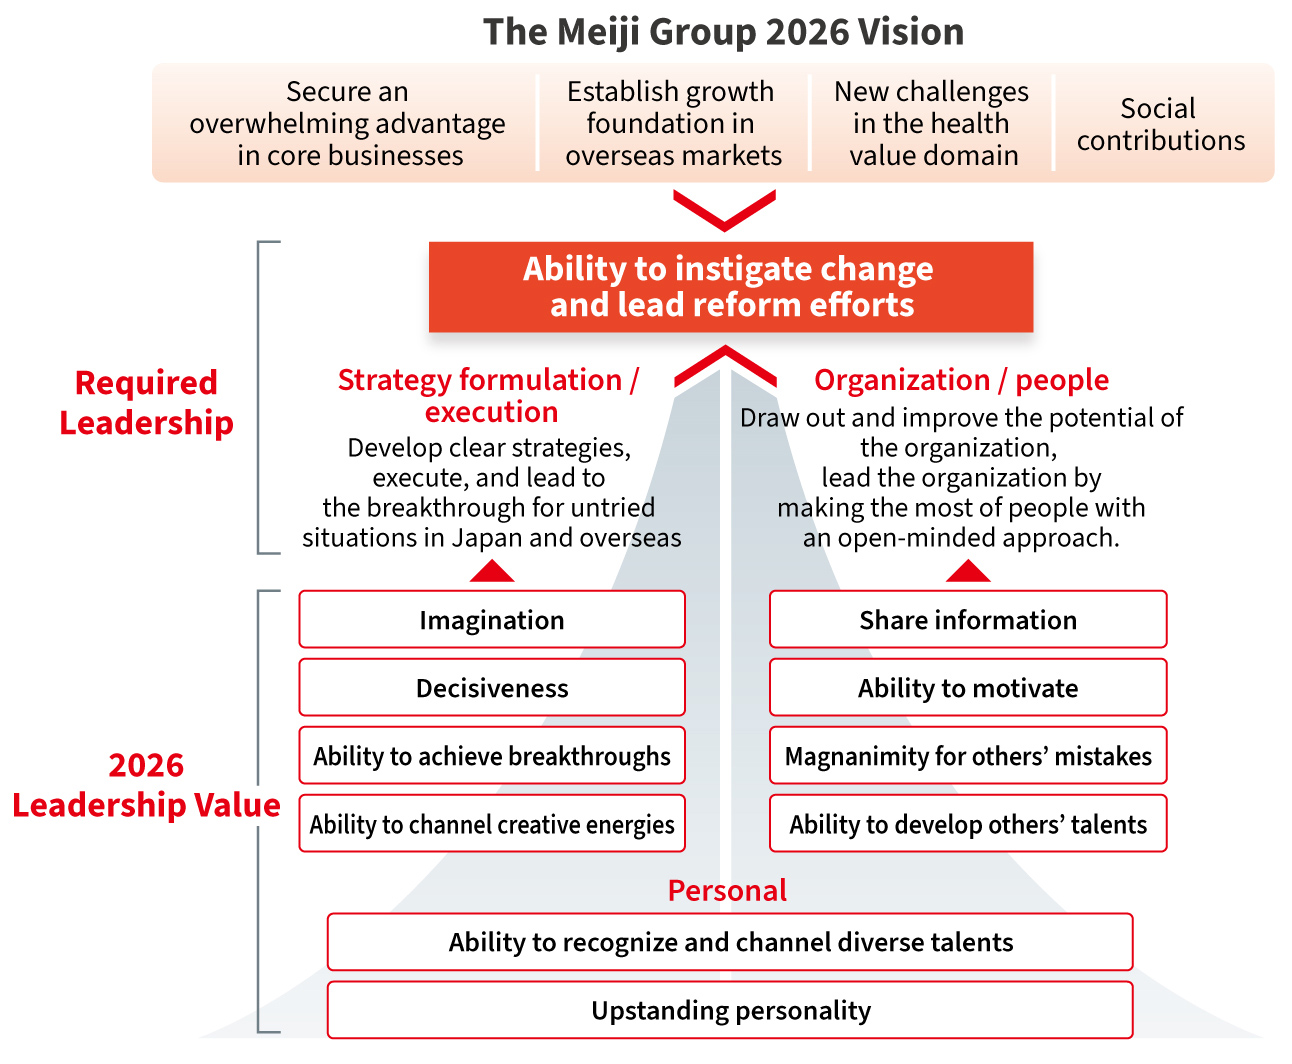 figure: The Meiji Group 2026 Vision